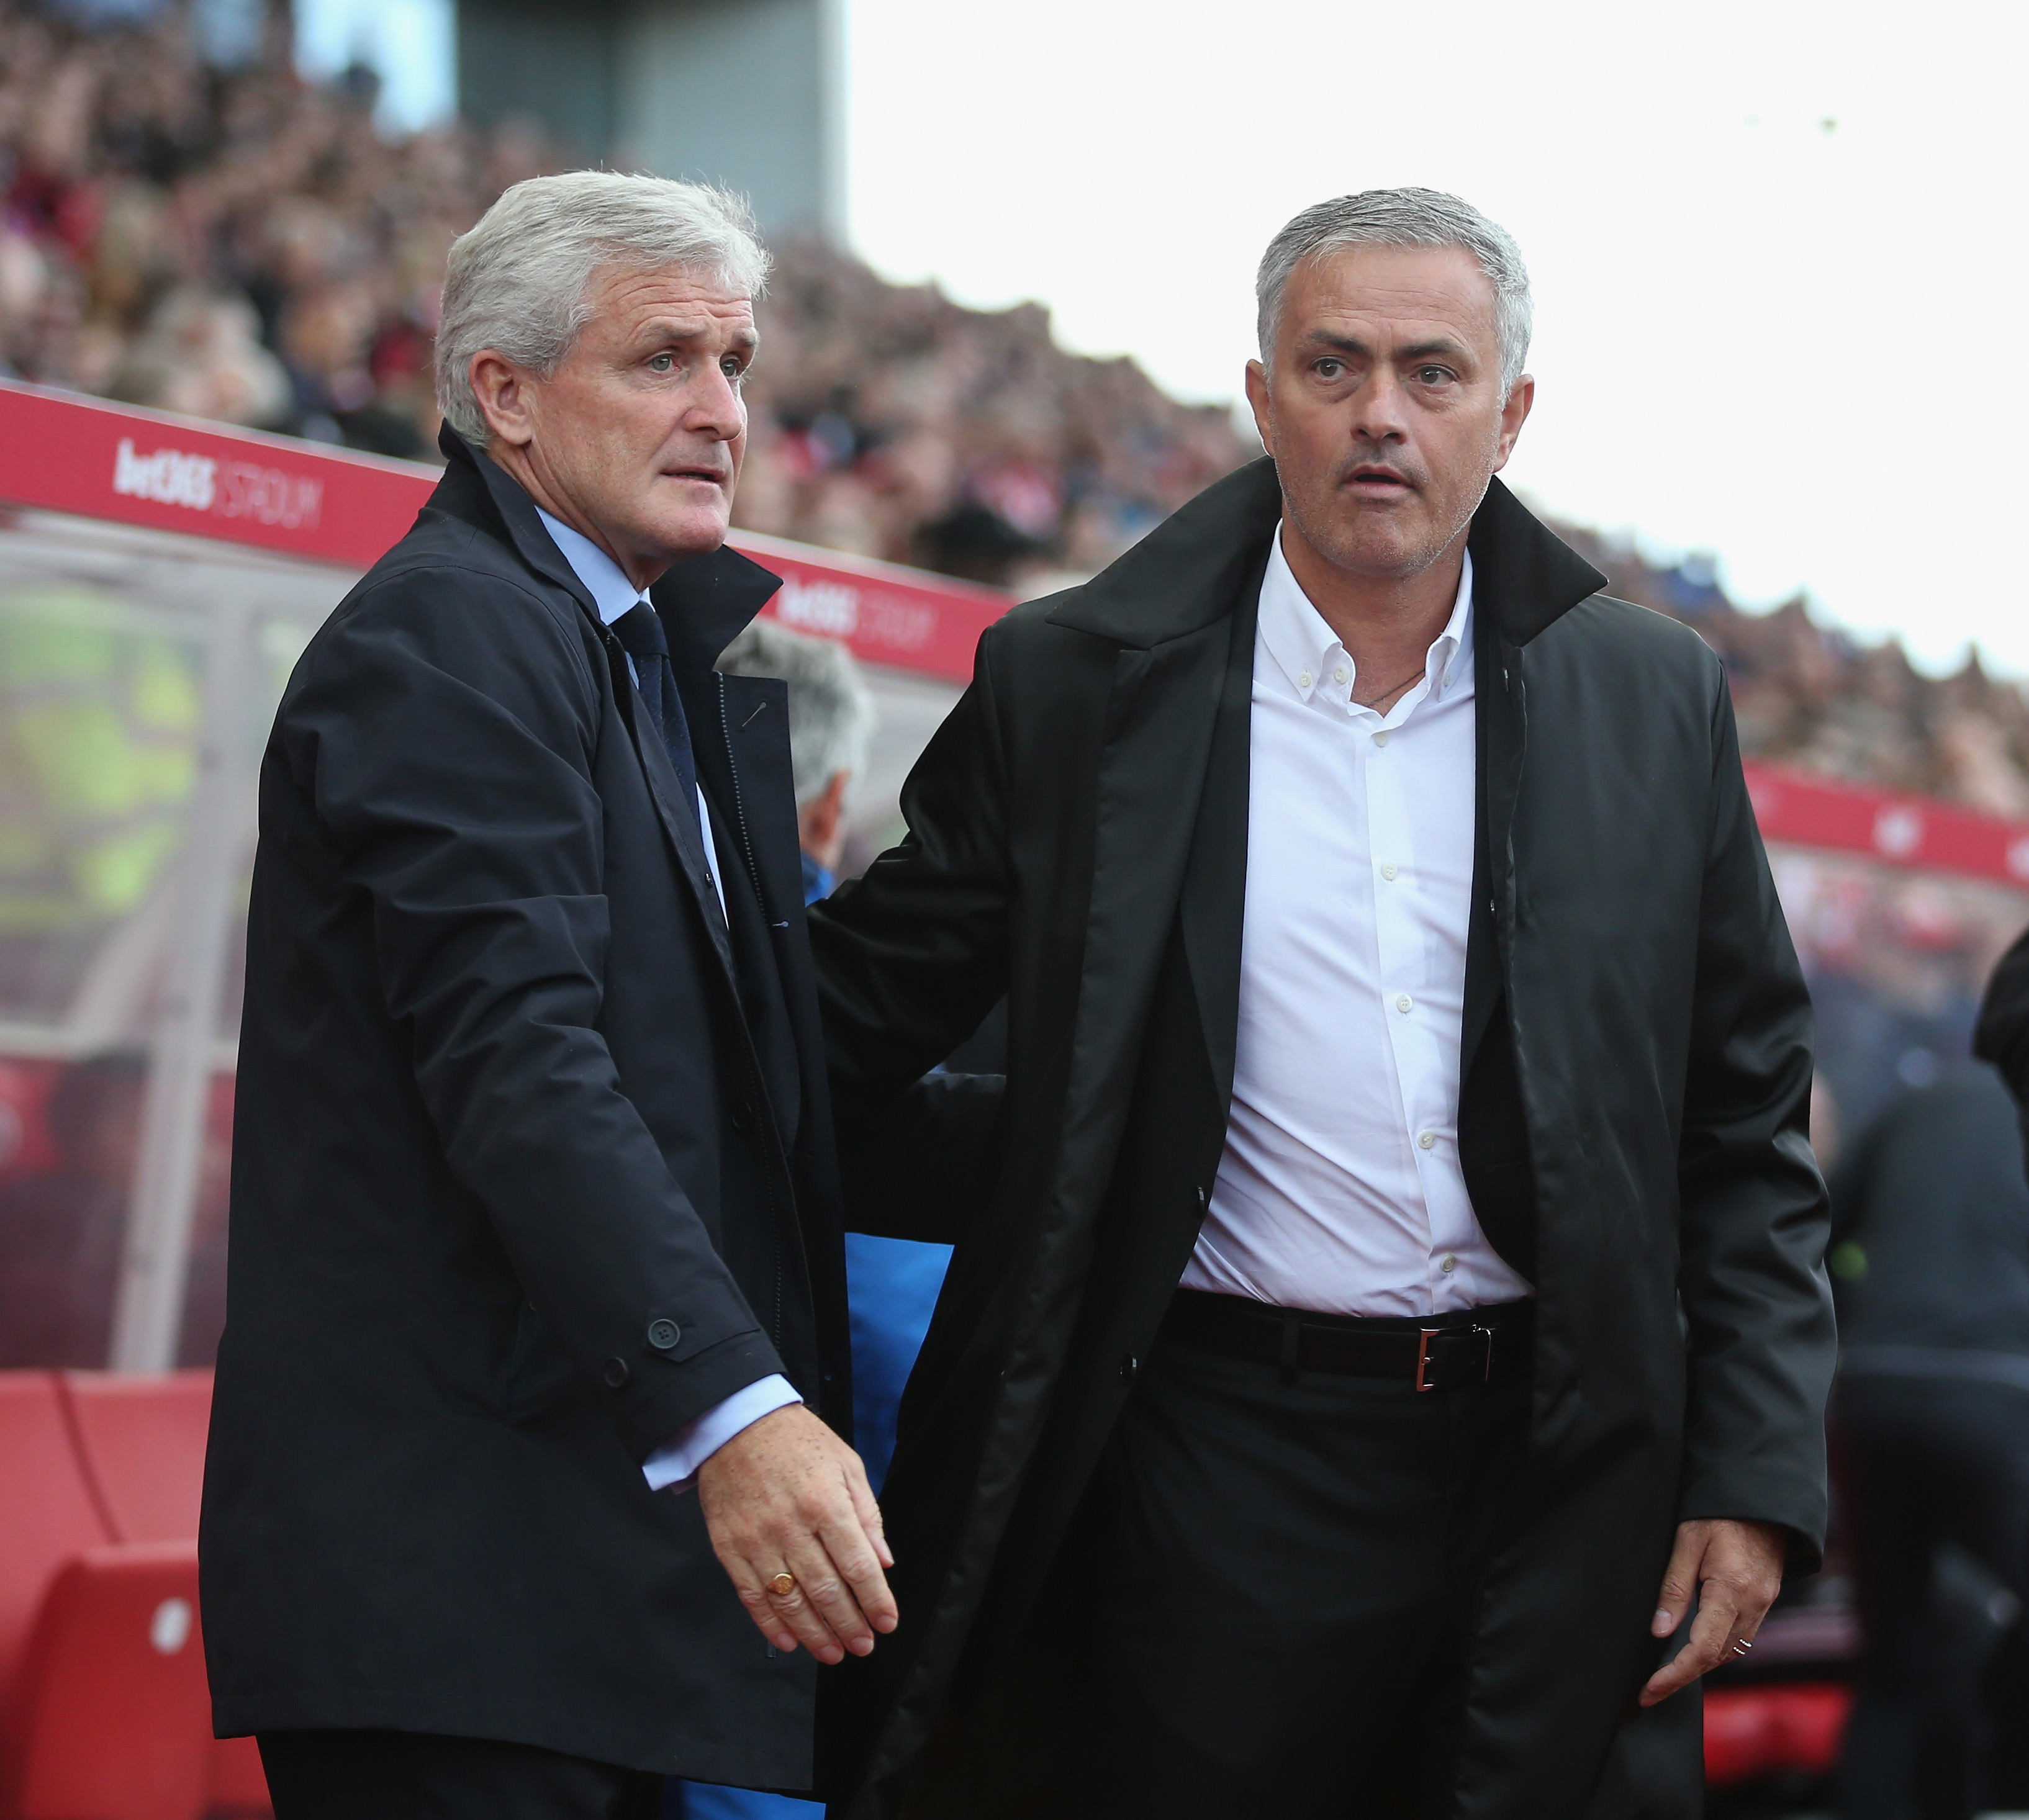 STOKE ON TRENT, ENGLAND - SEPTEMBER 09:  Stoke manager Mark Hughes and Manchester United manager Jose Mourinho during the Premier League match between Stoke City and Manchester United at Bet365 Stadium on September 9, 2017 in Stoke on Trent, England.  (Photo by Alex Morton/Getty Images)